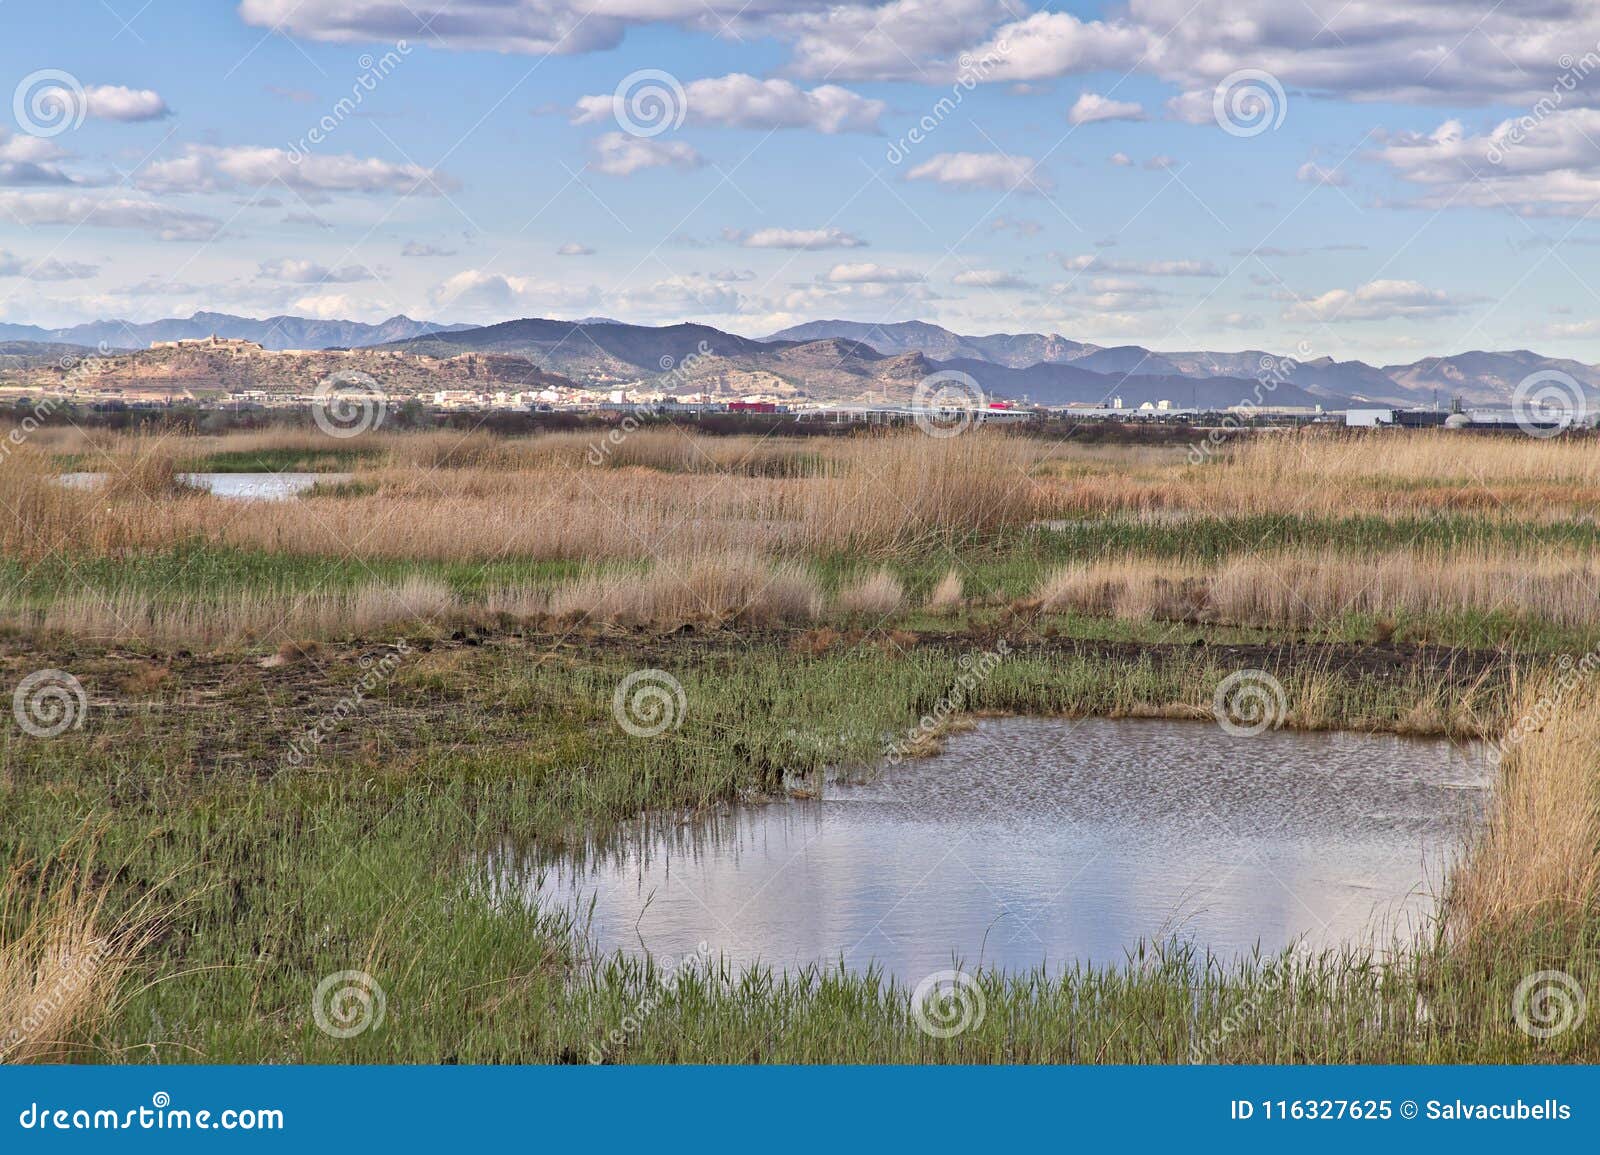 natural landscape of a small wetland